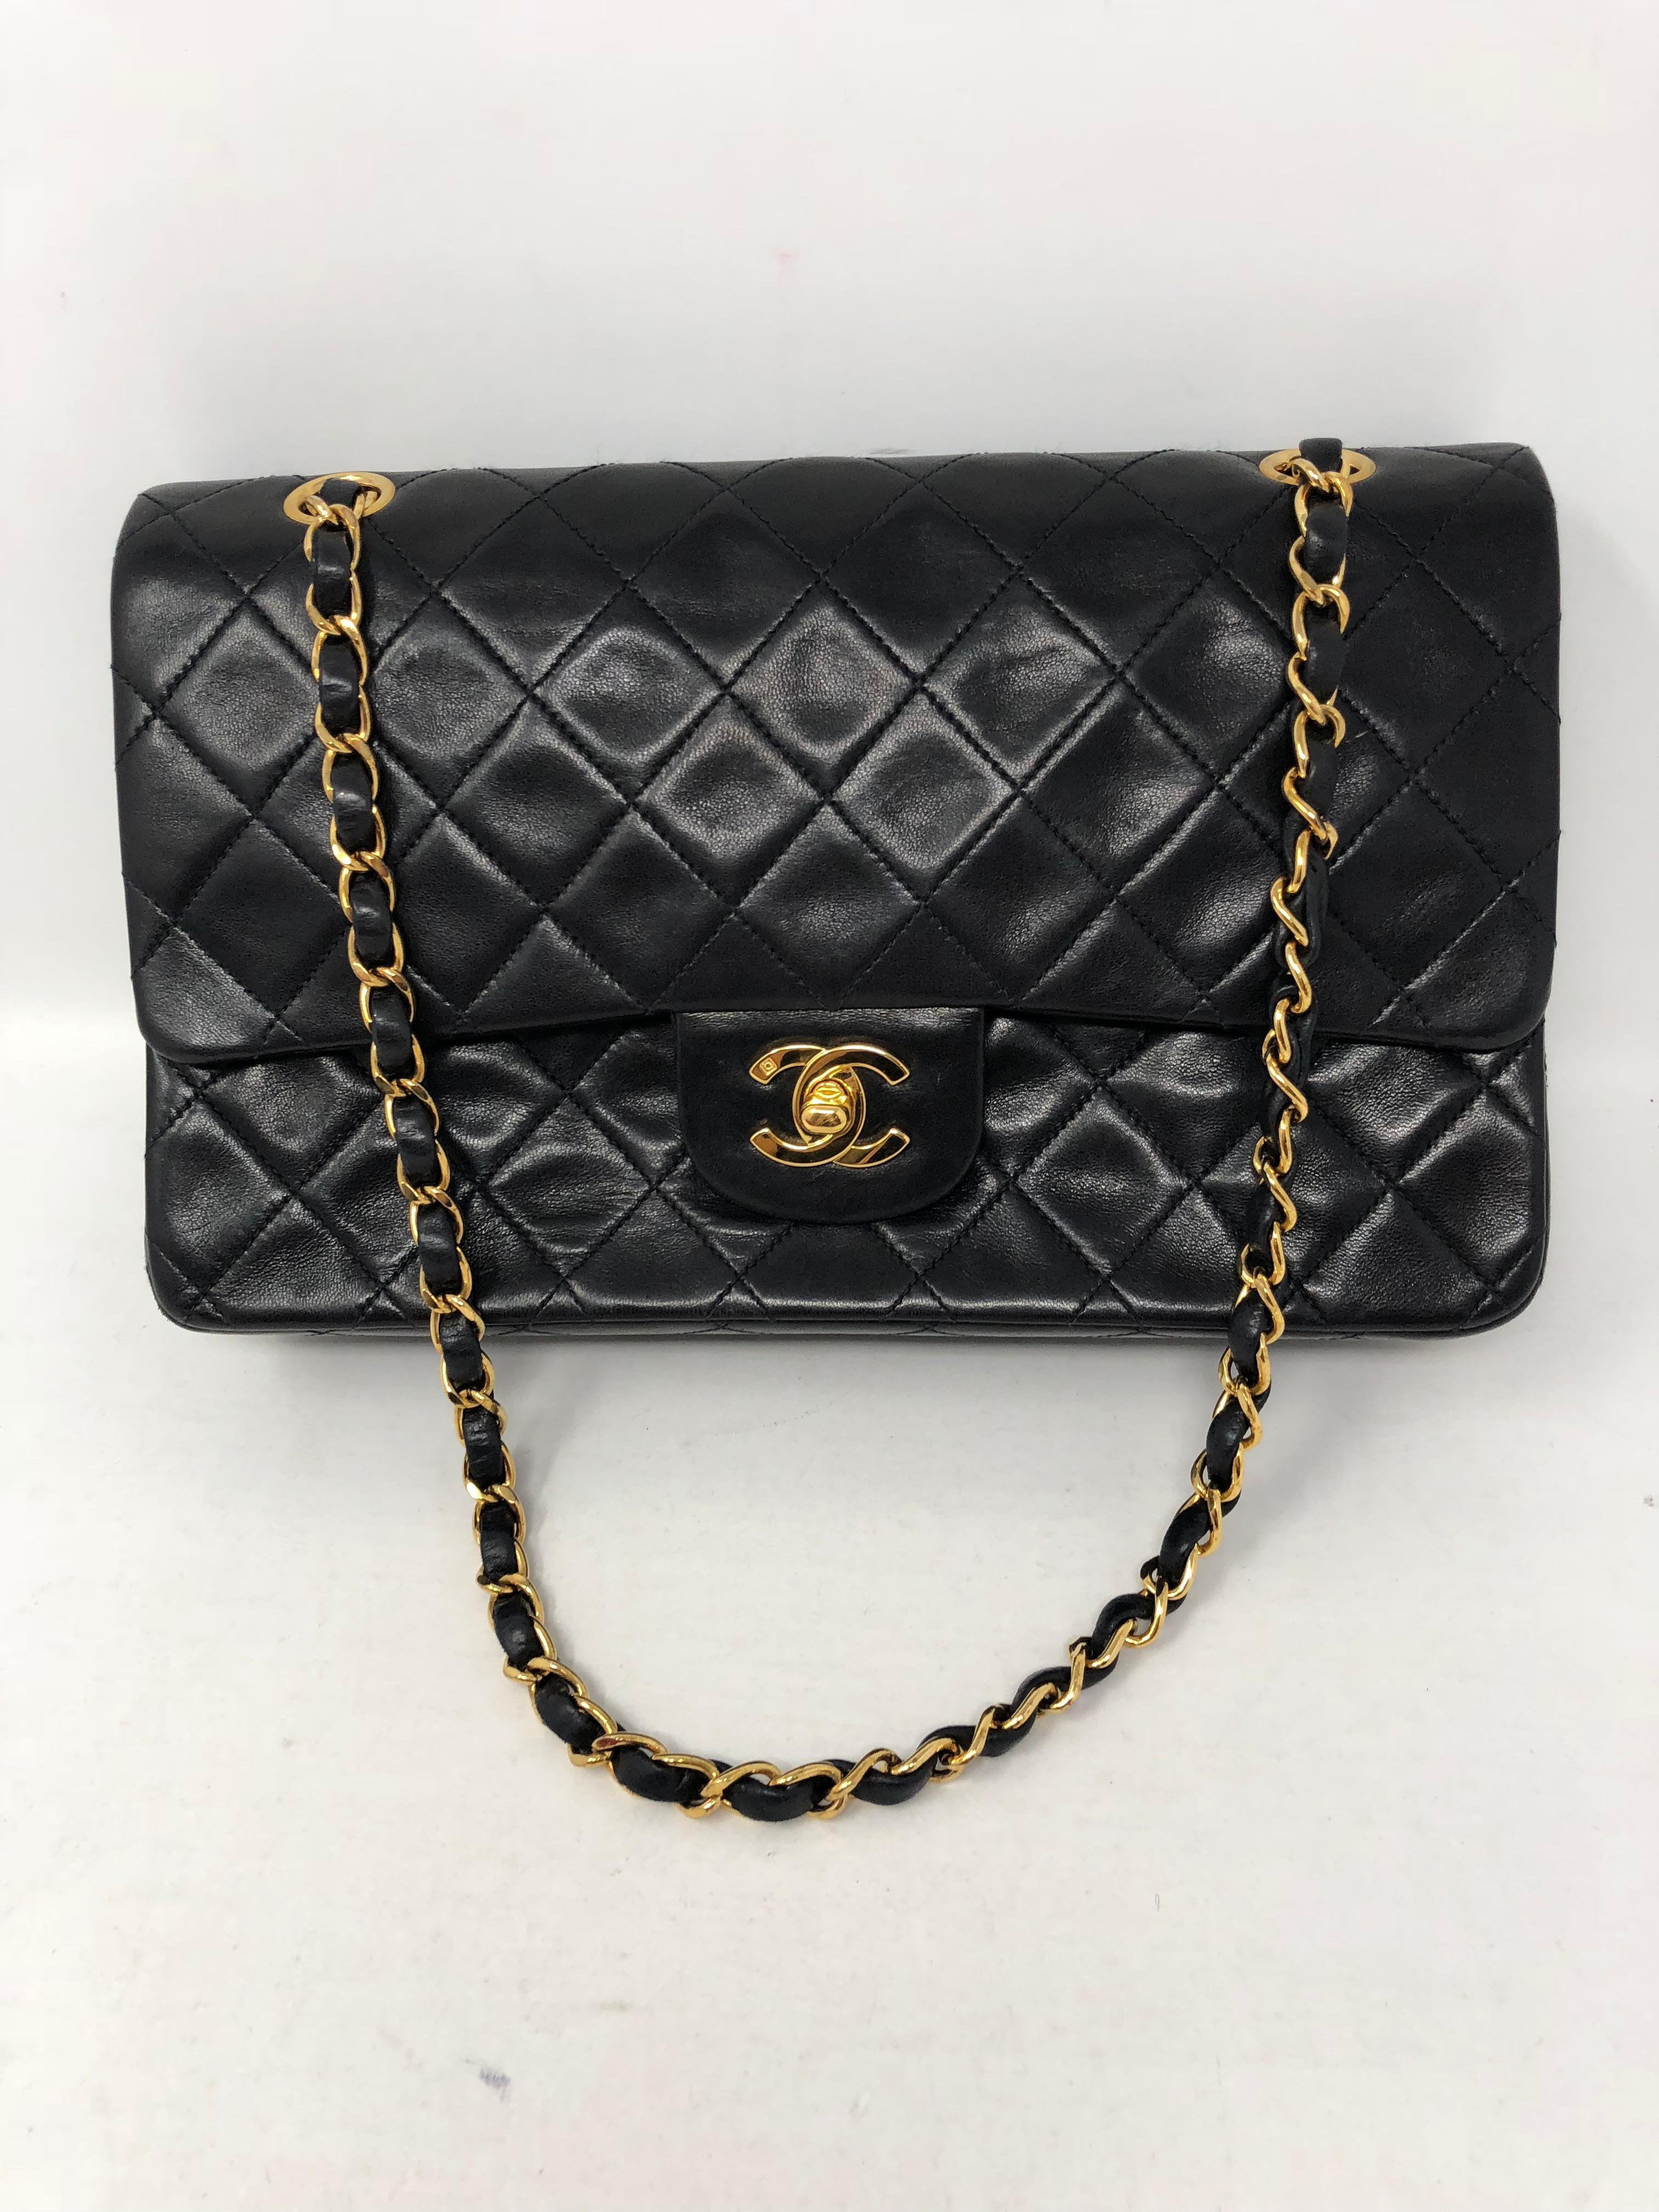 Chanel Black Classic Double Flap in medium size. Black lambskin leather with gold hardware. Burgundy interior. Double flap classic. Iconic classic never goes out of style. This one is in great vintage condition. Can be worn doubled or longer with